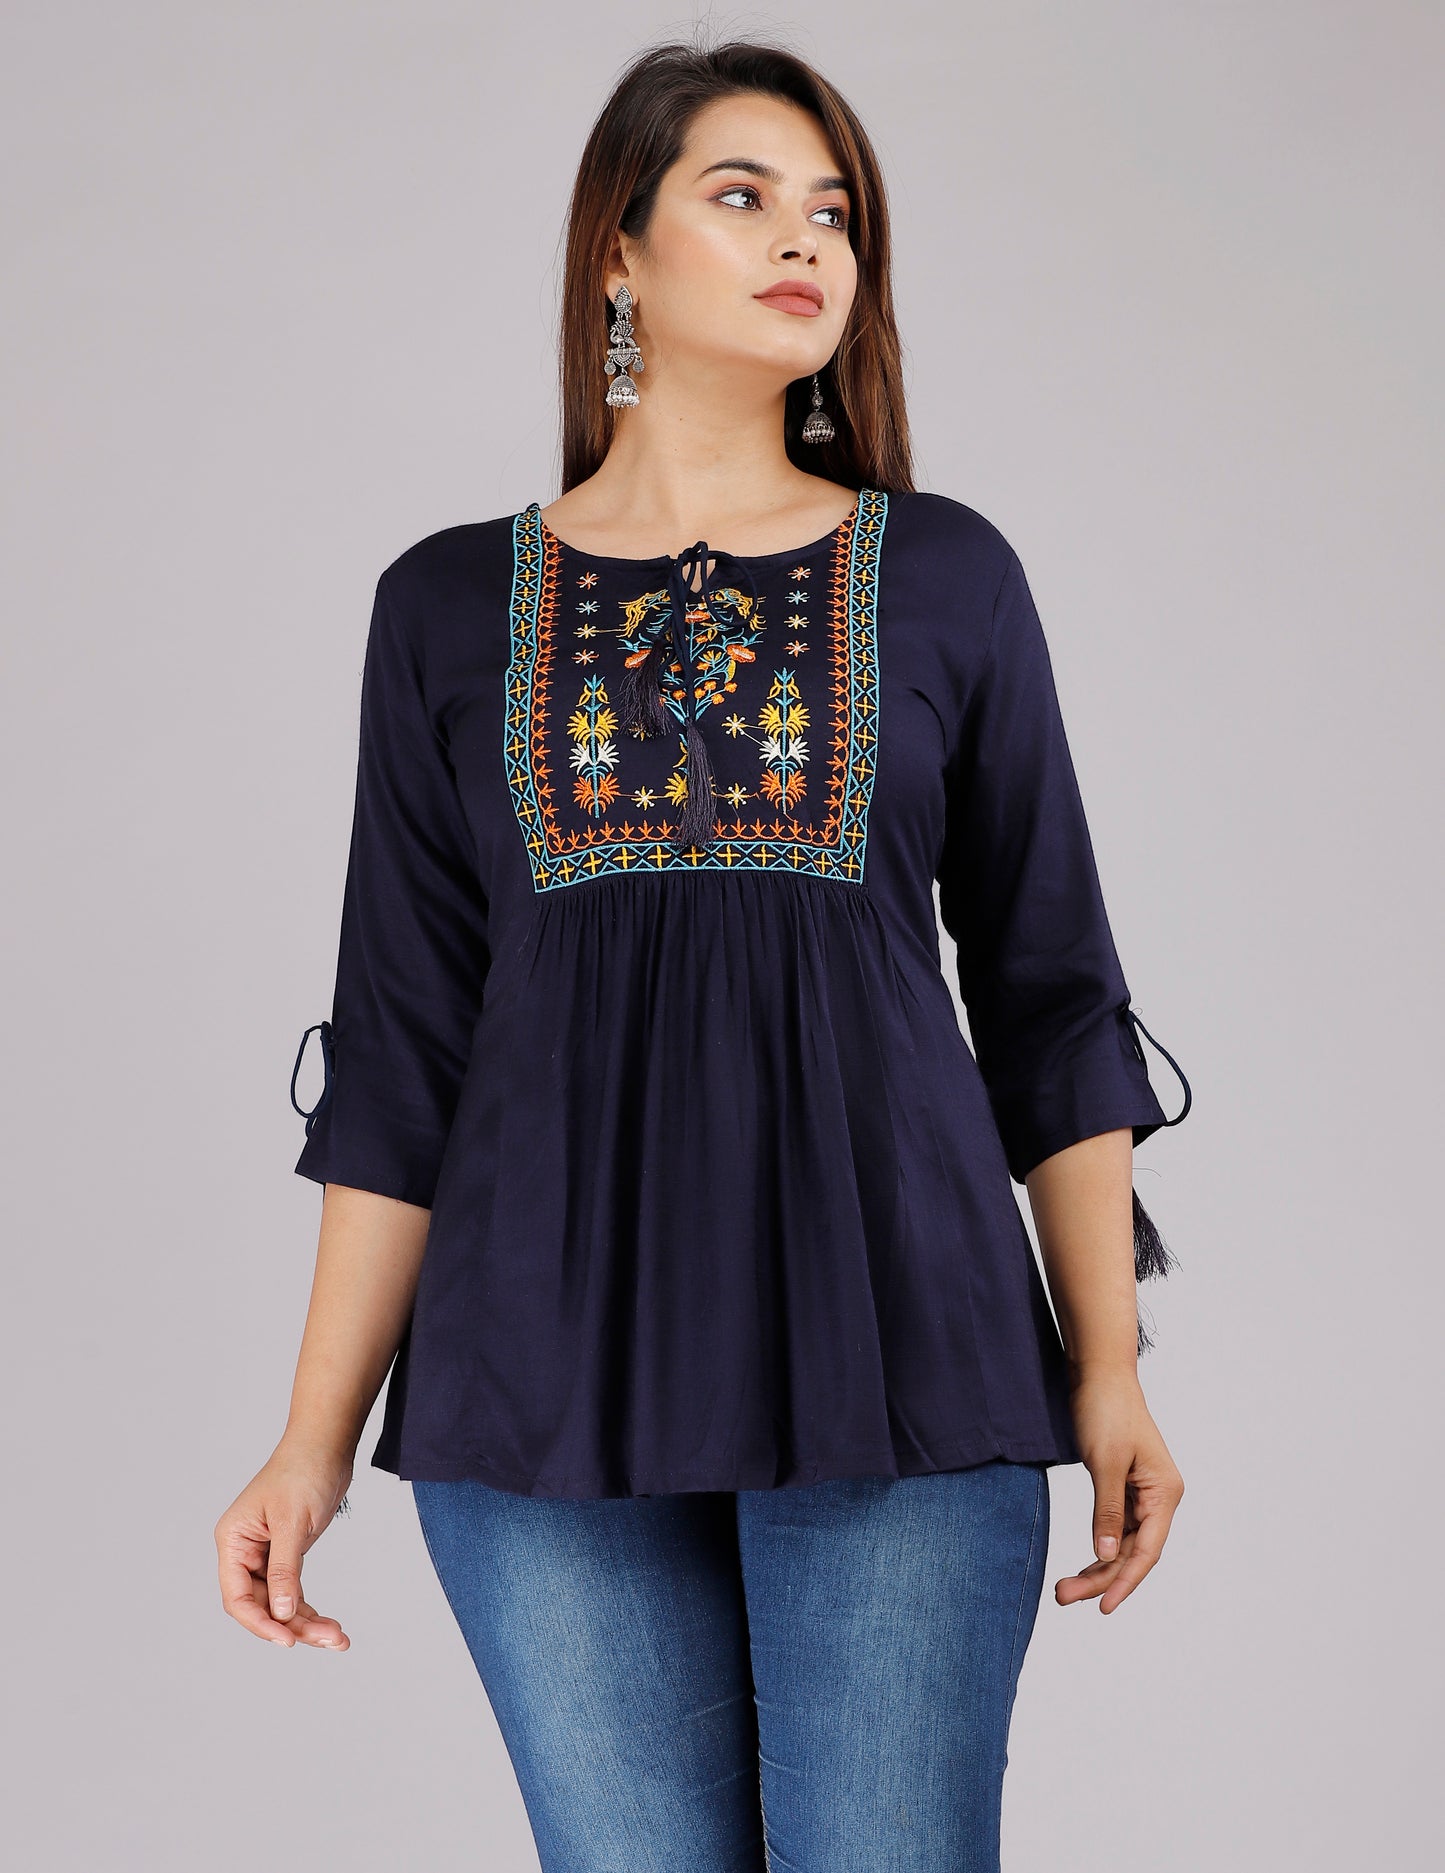 Solid Navy Blue Color 3/4th Sleeve Embroidered Top